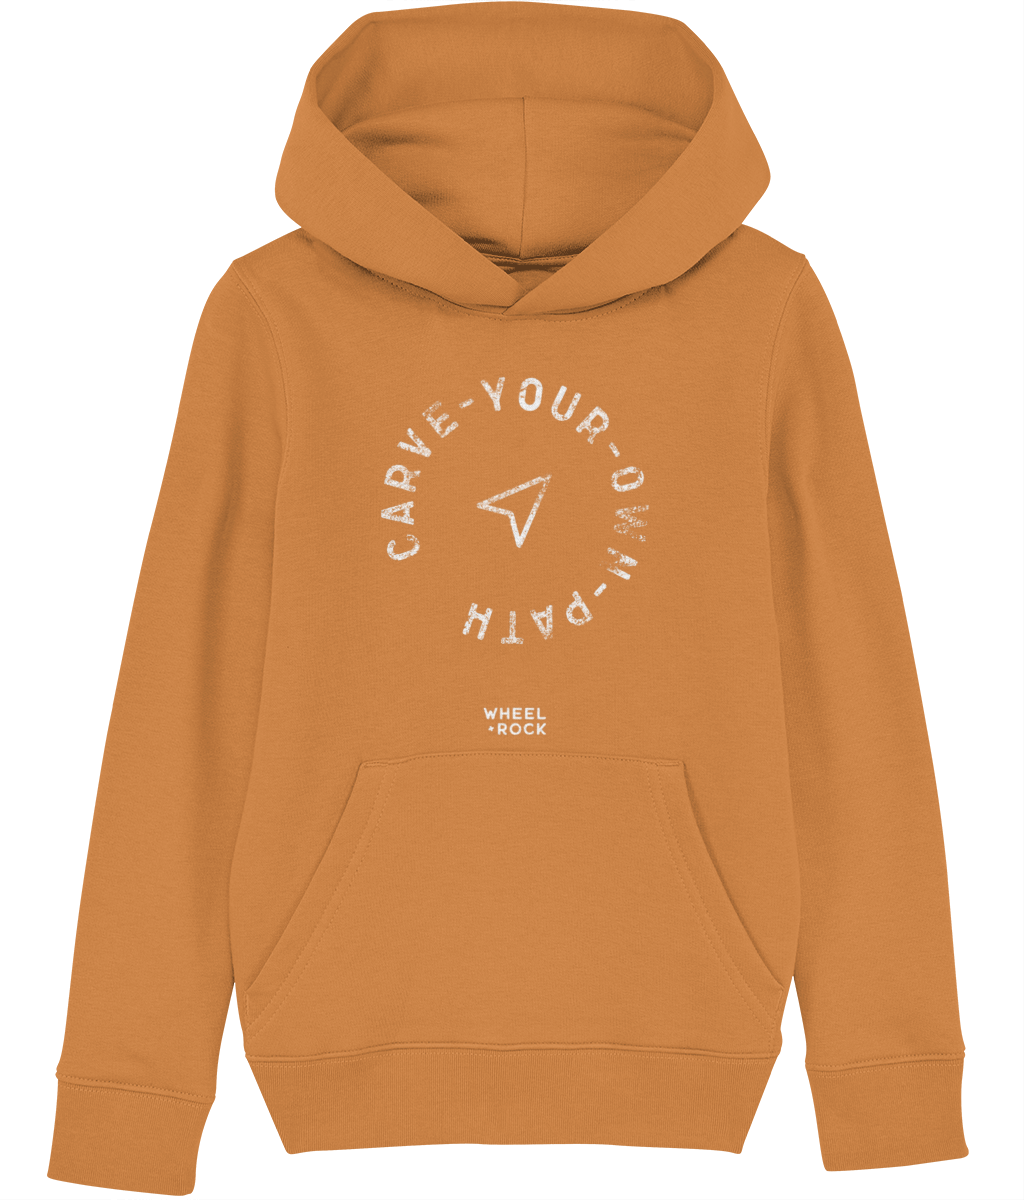 Carve Your Own Path - Kids Hoodie - BRIGHTS